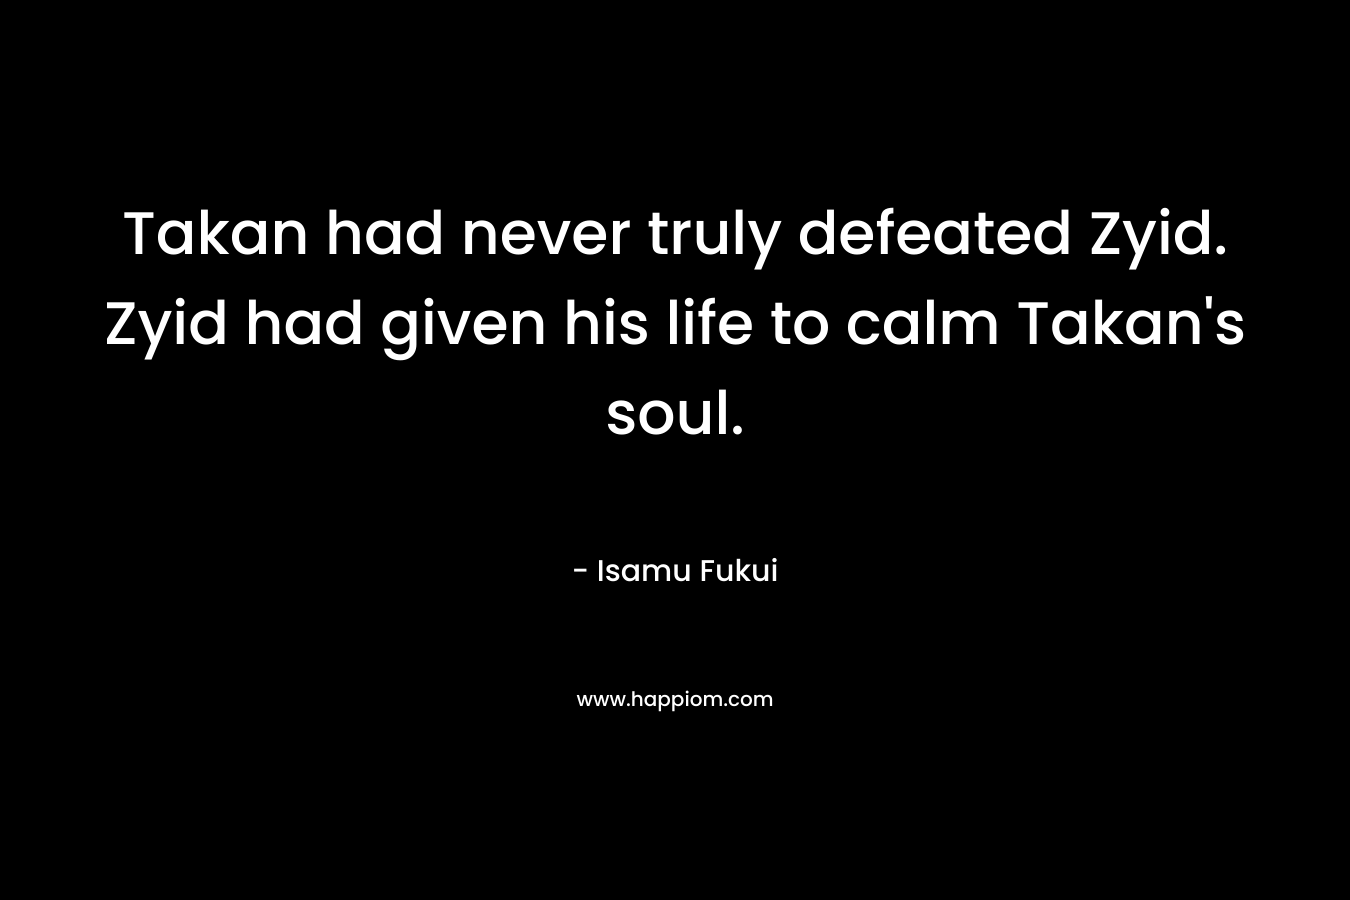 Takan had never truly defeated Zyid. Zyid had given his life to calm Takan’s soul. – Isamu Fukui